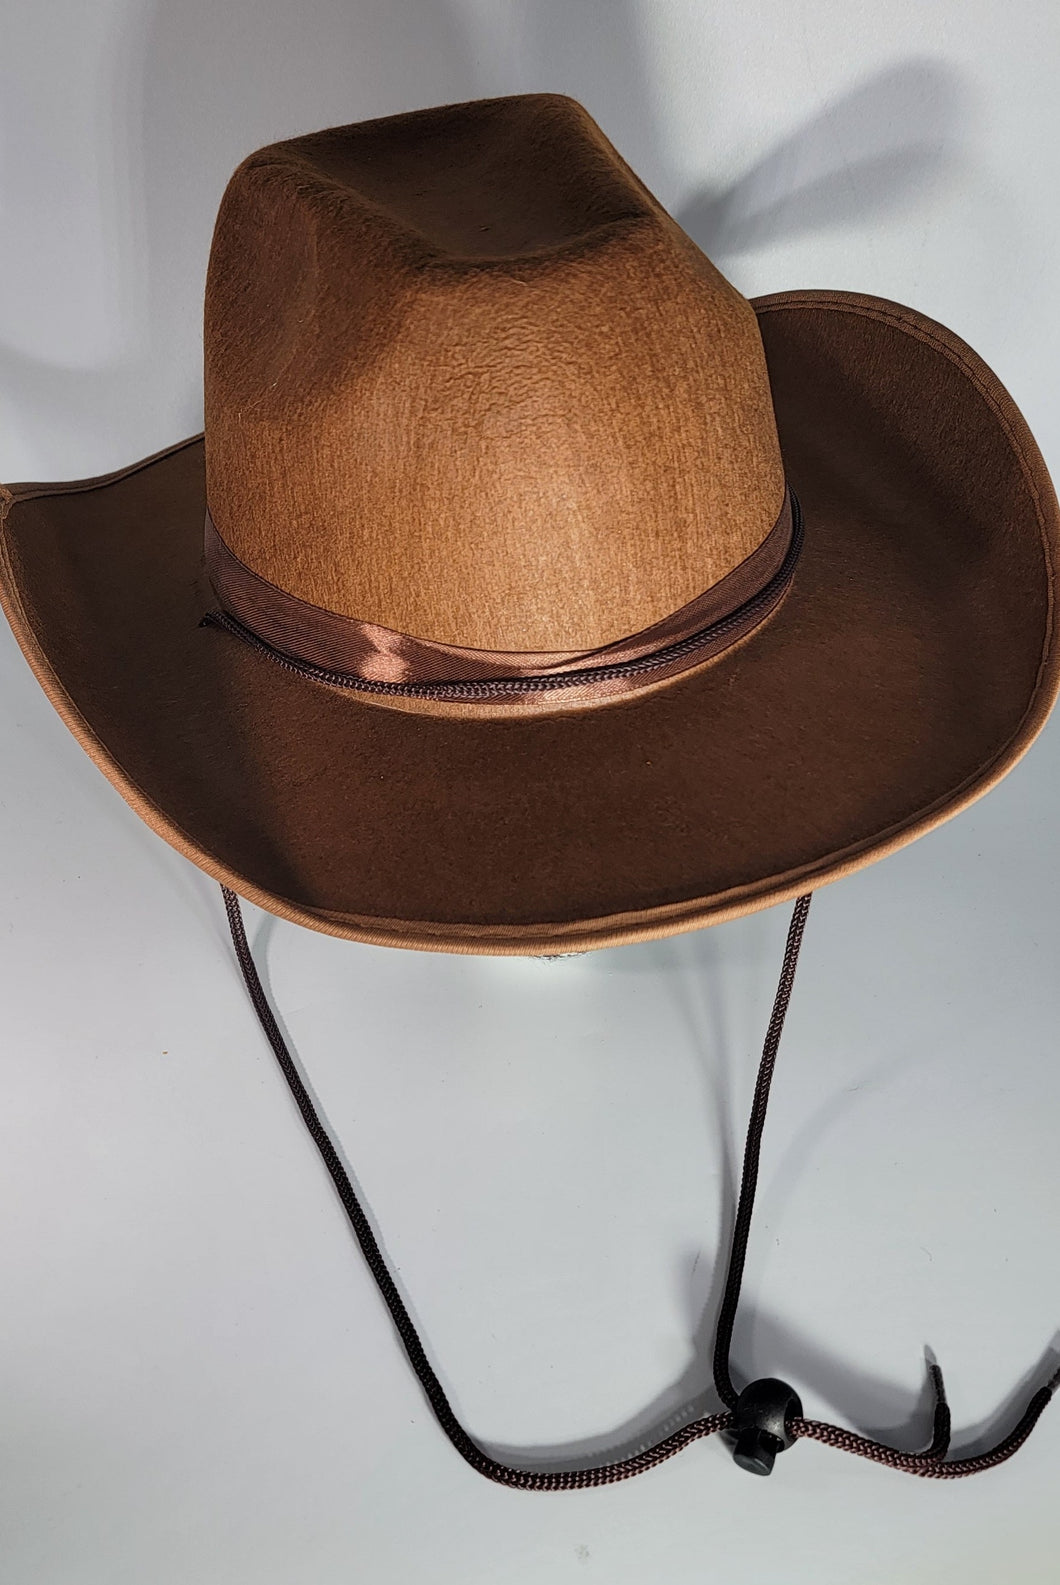 Brown Cowboy Hat Costume, Dress up, Halloween, One-Size